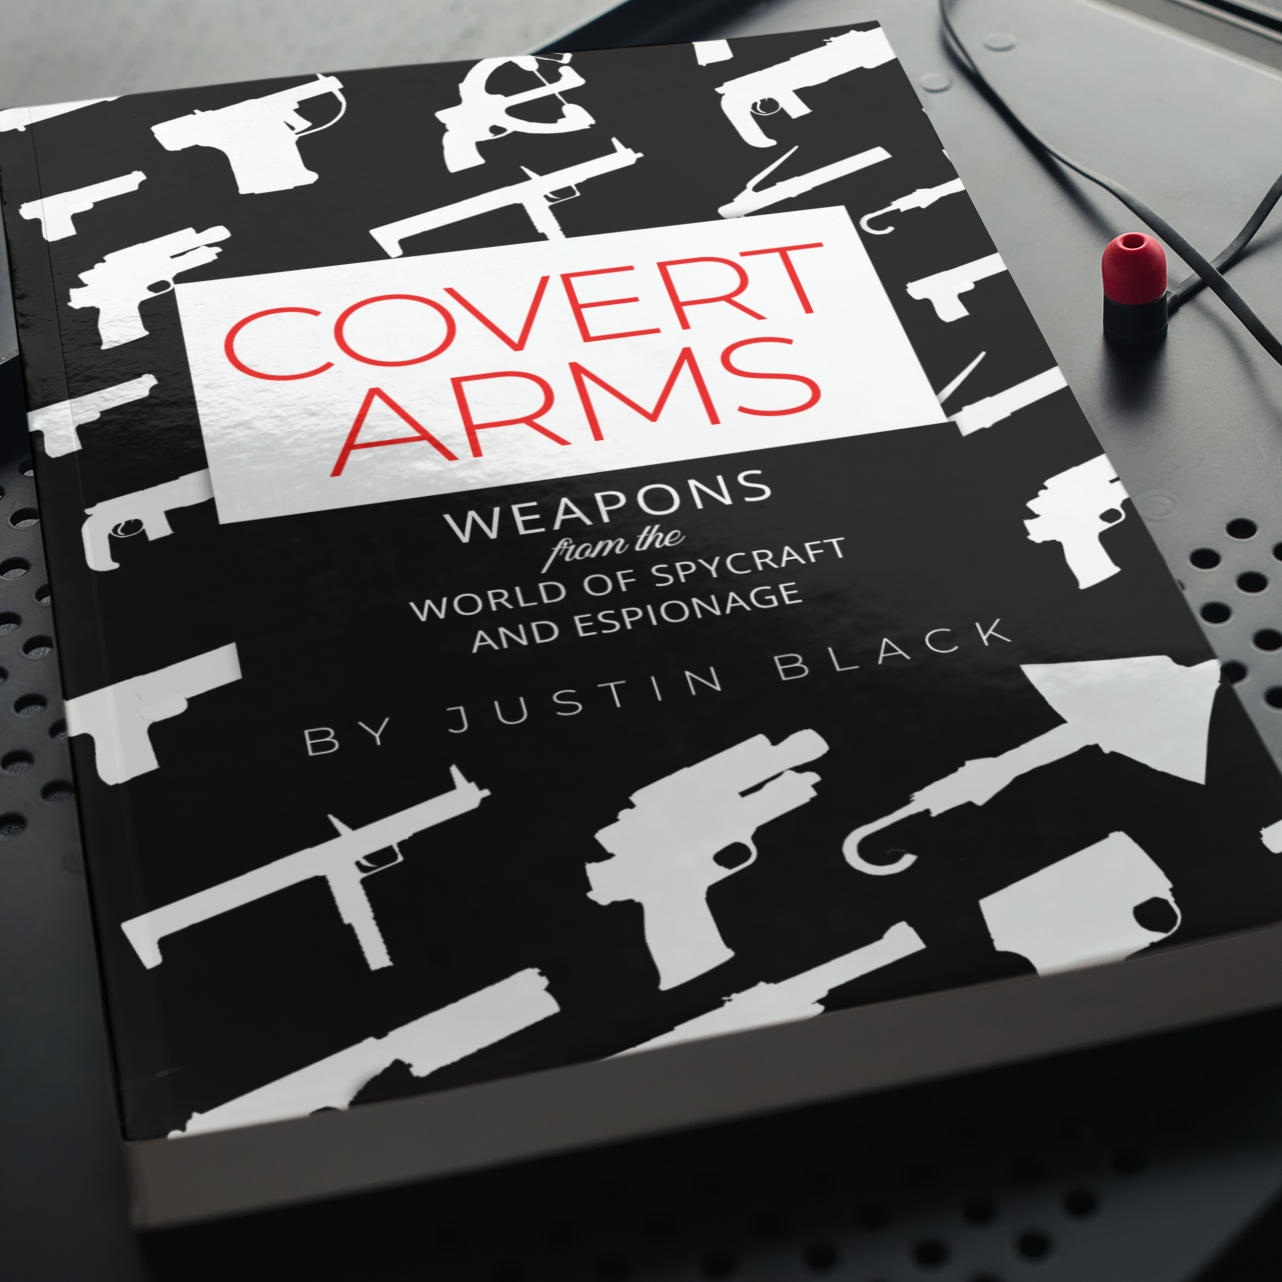 Covert Arms: Weapons from the World of Spycraft and 